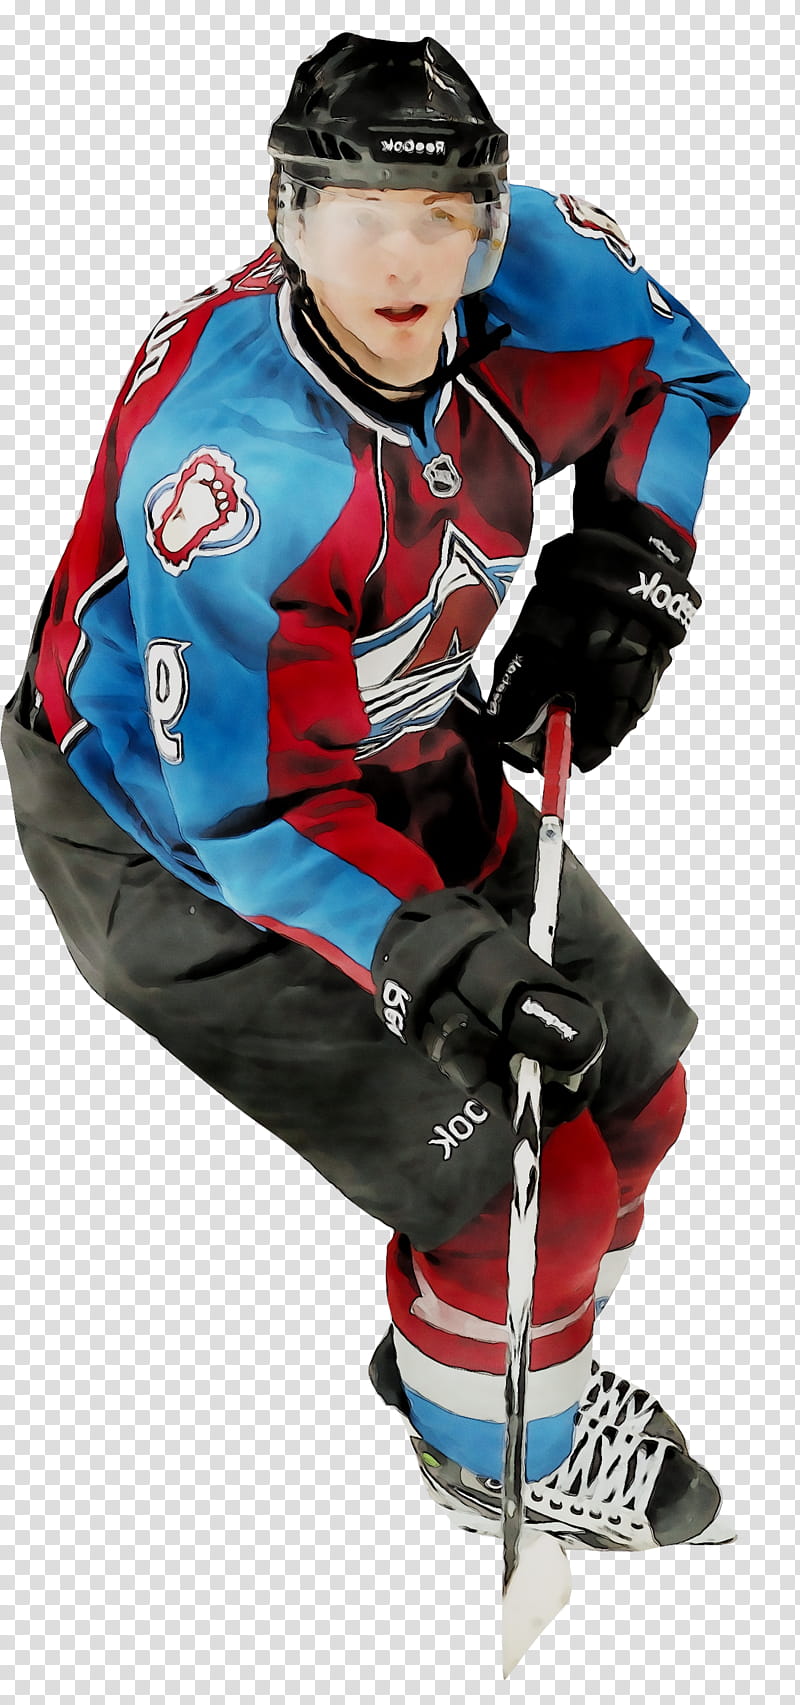 Ice, Goaltender Mask, Ice Hockey, Shoe, Helmet, Outerwear, Pants, Ice Hockey Equipment transparent background PNG clipart